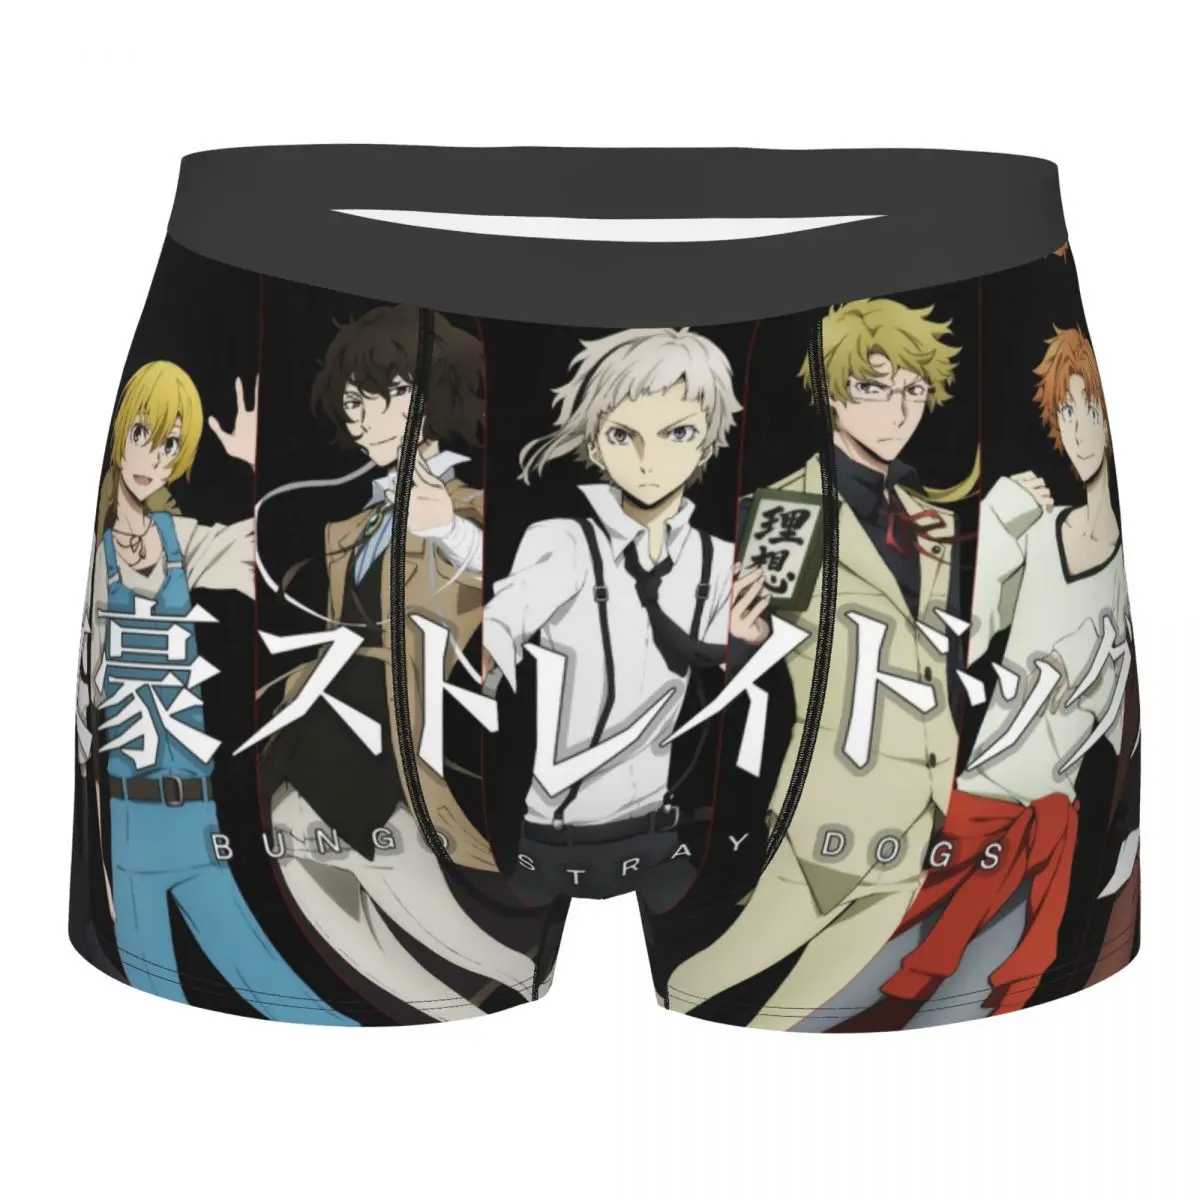 

Bungou Stray Dogs Wan Anime Underpants Homme Panties Male Underwear Print Shorts Boxer Briefs